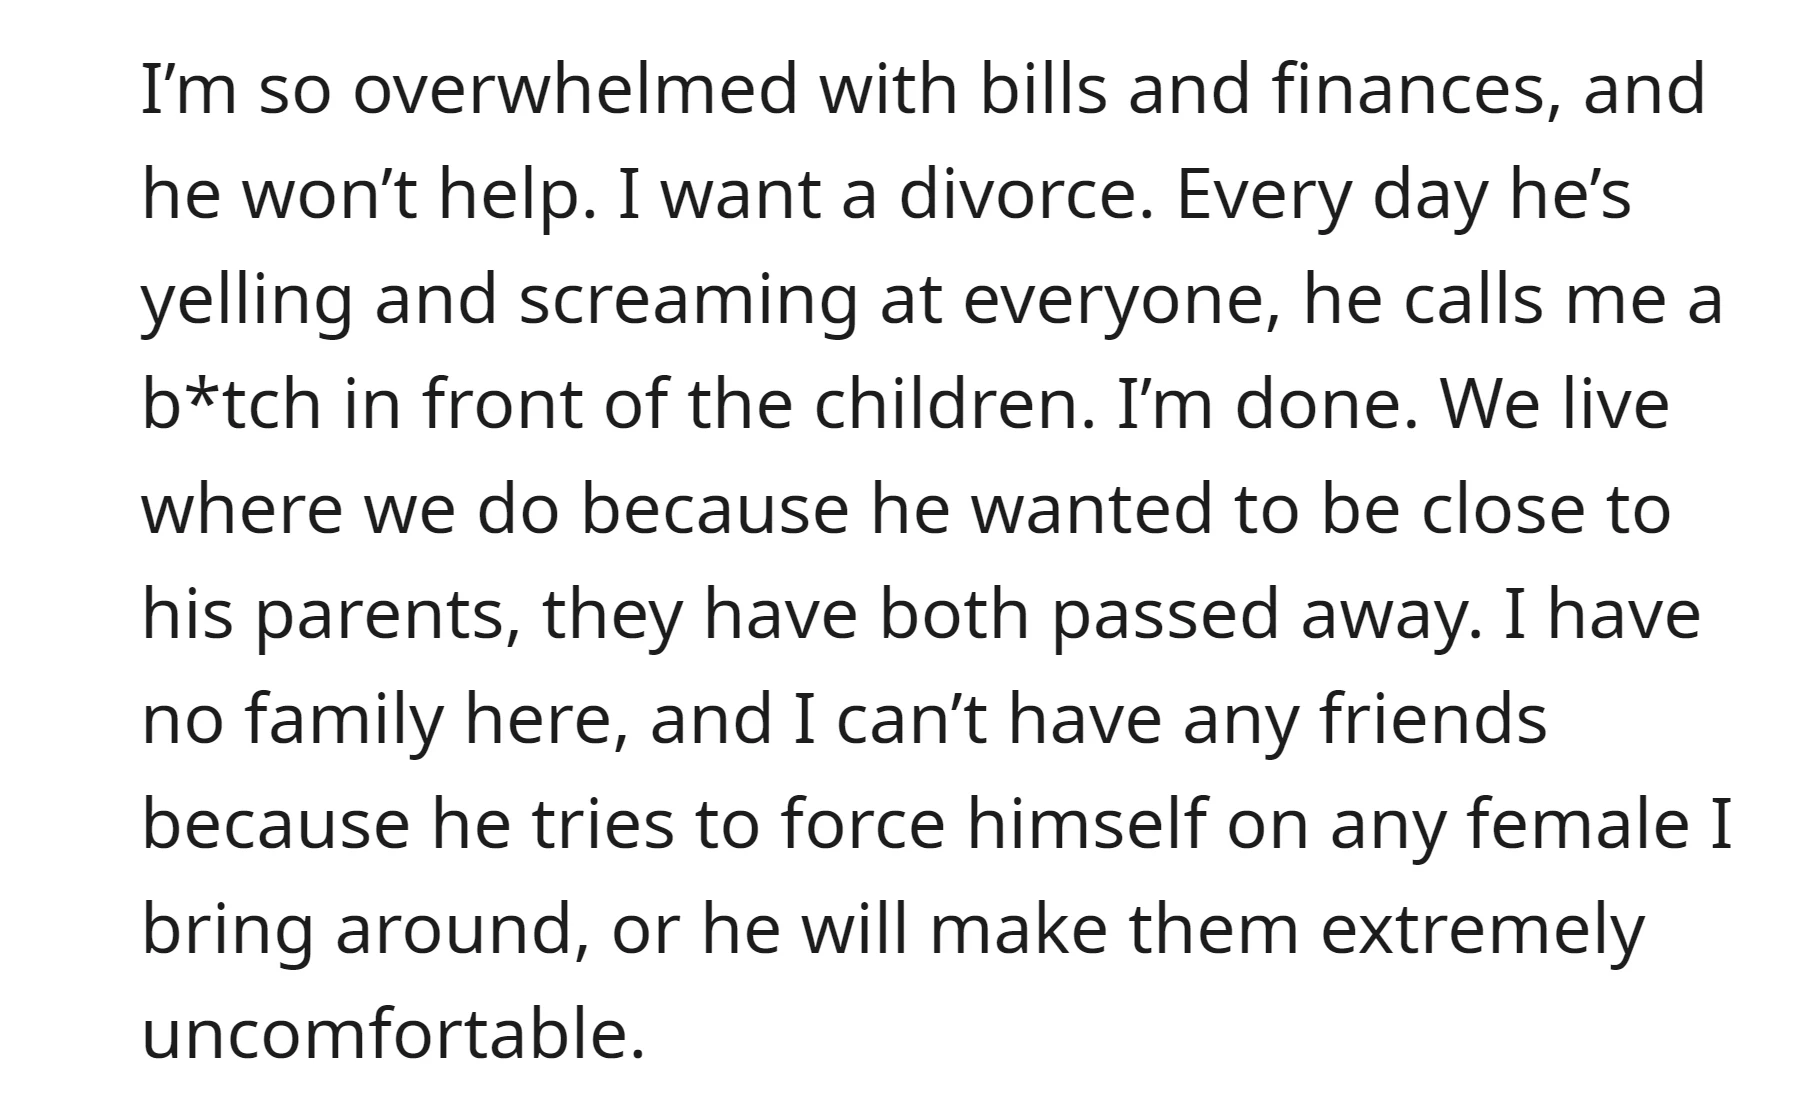 Overwhelmed by financial burdens and enduring verbal abuse, the OP expresses a desire for divorce